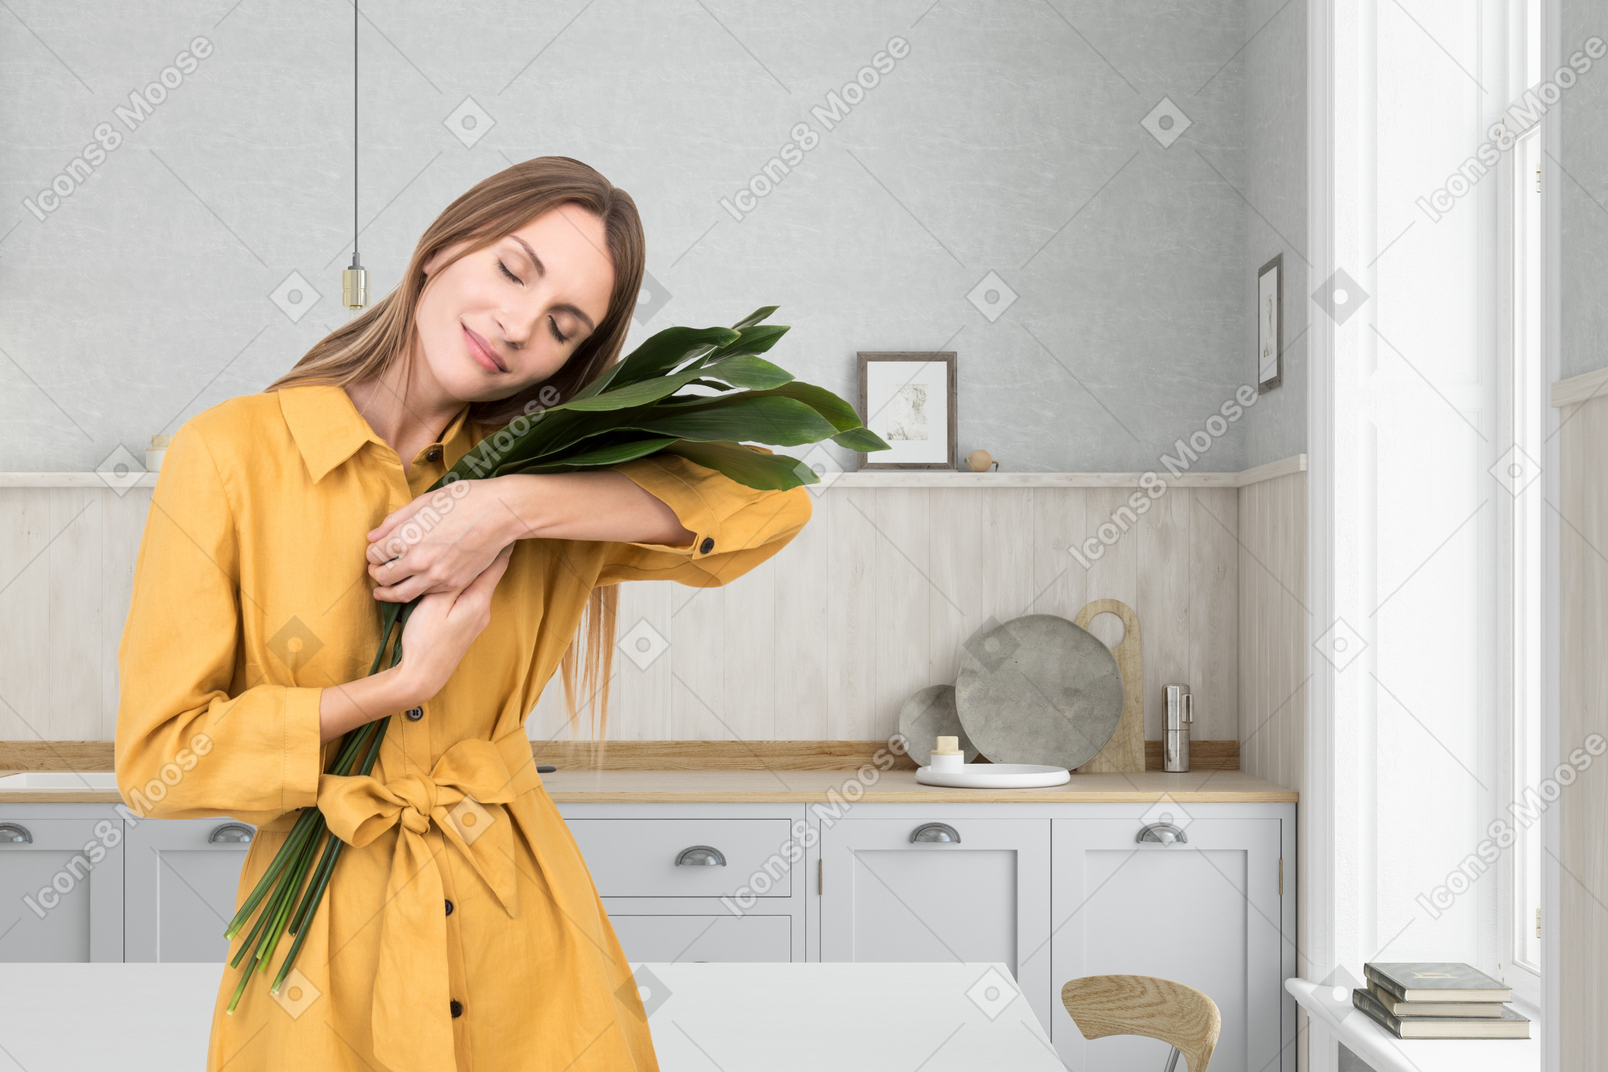 Woman in yellow dress holding large leaves